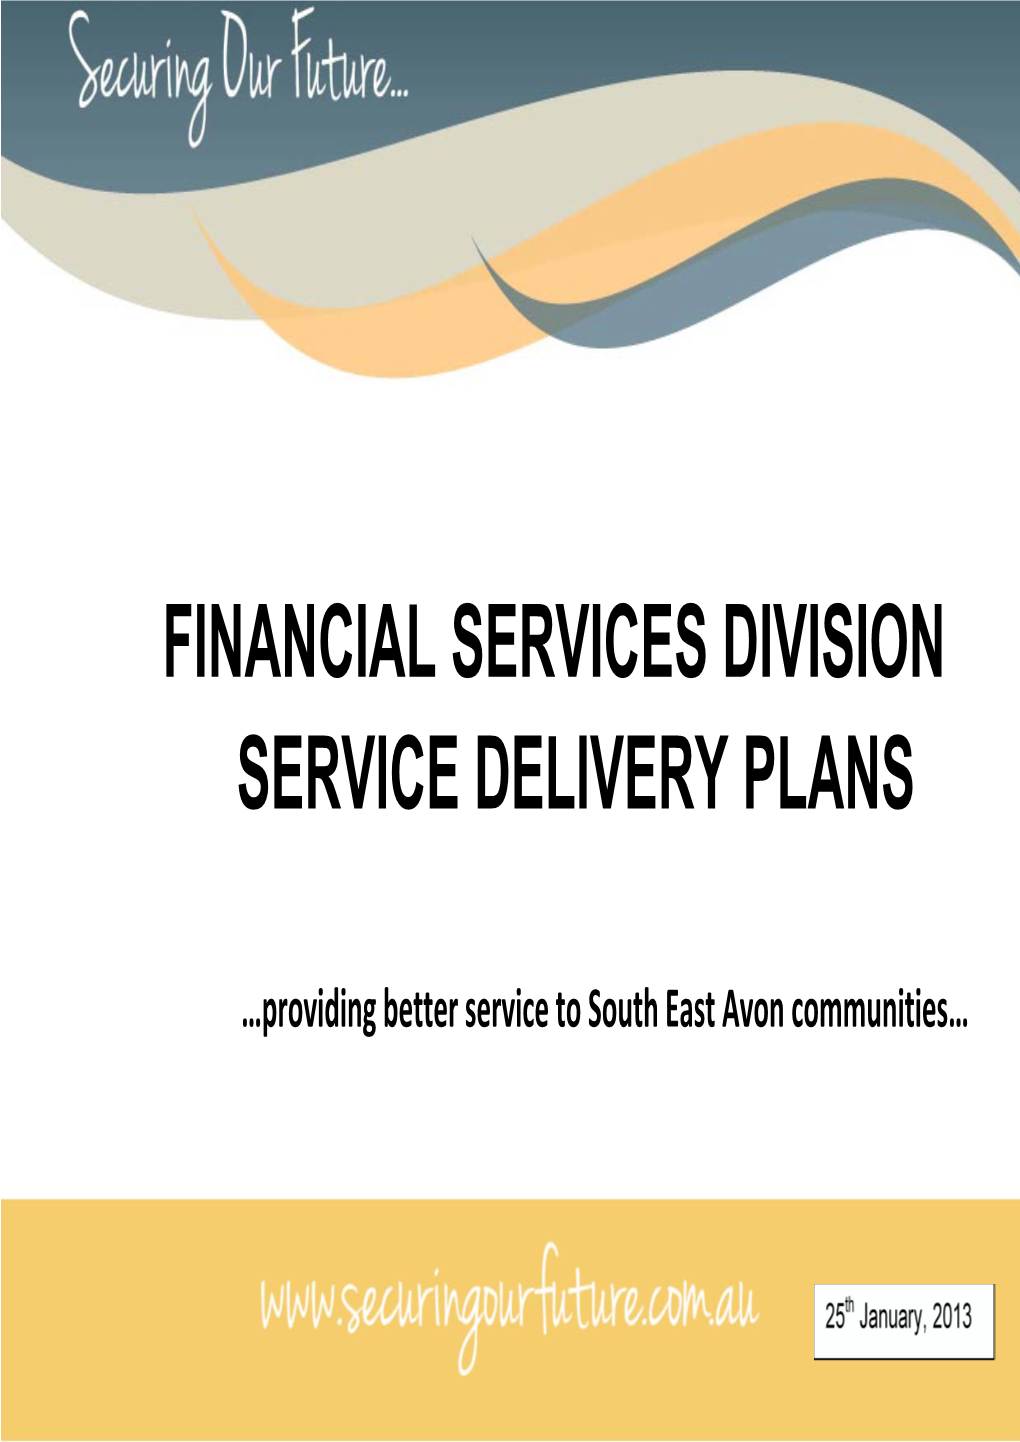 Financial Services Division Service Delivery Plans